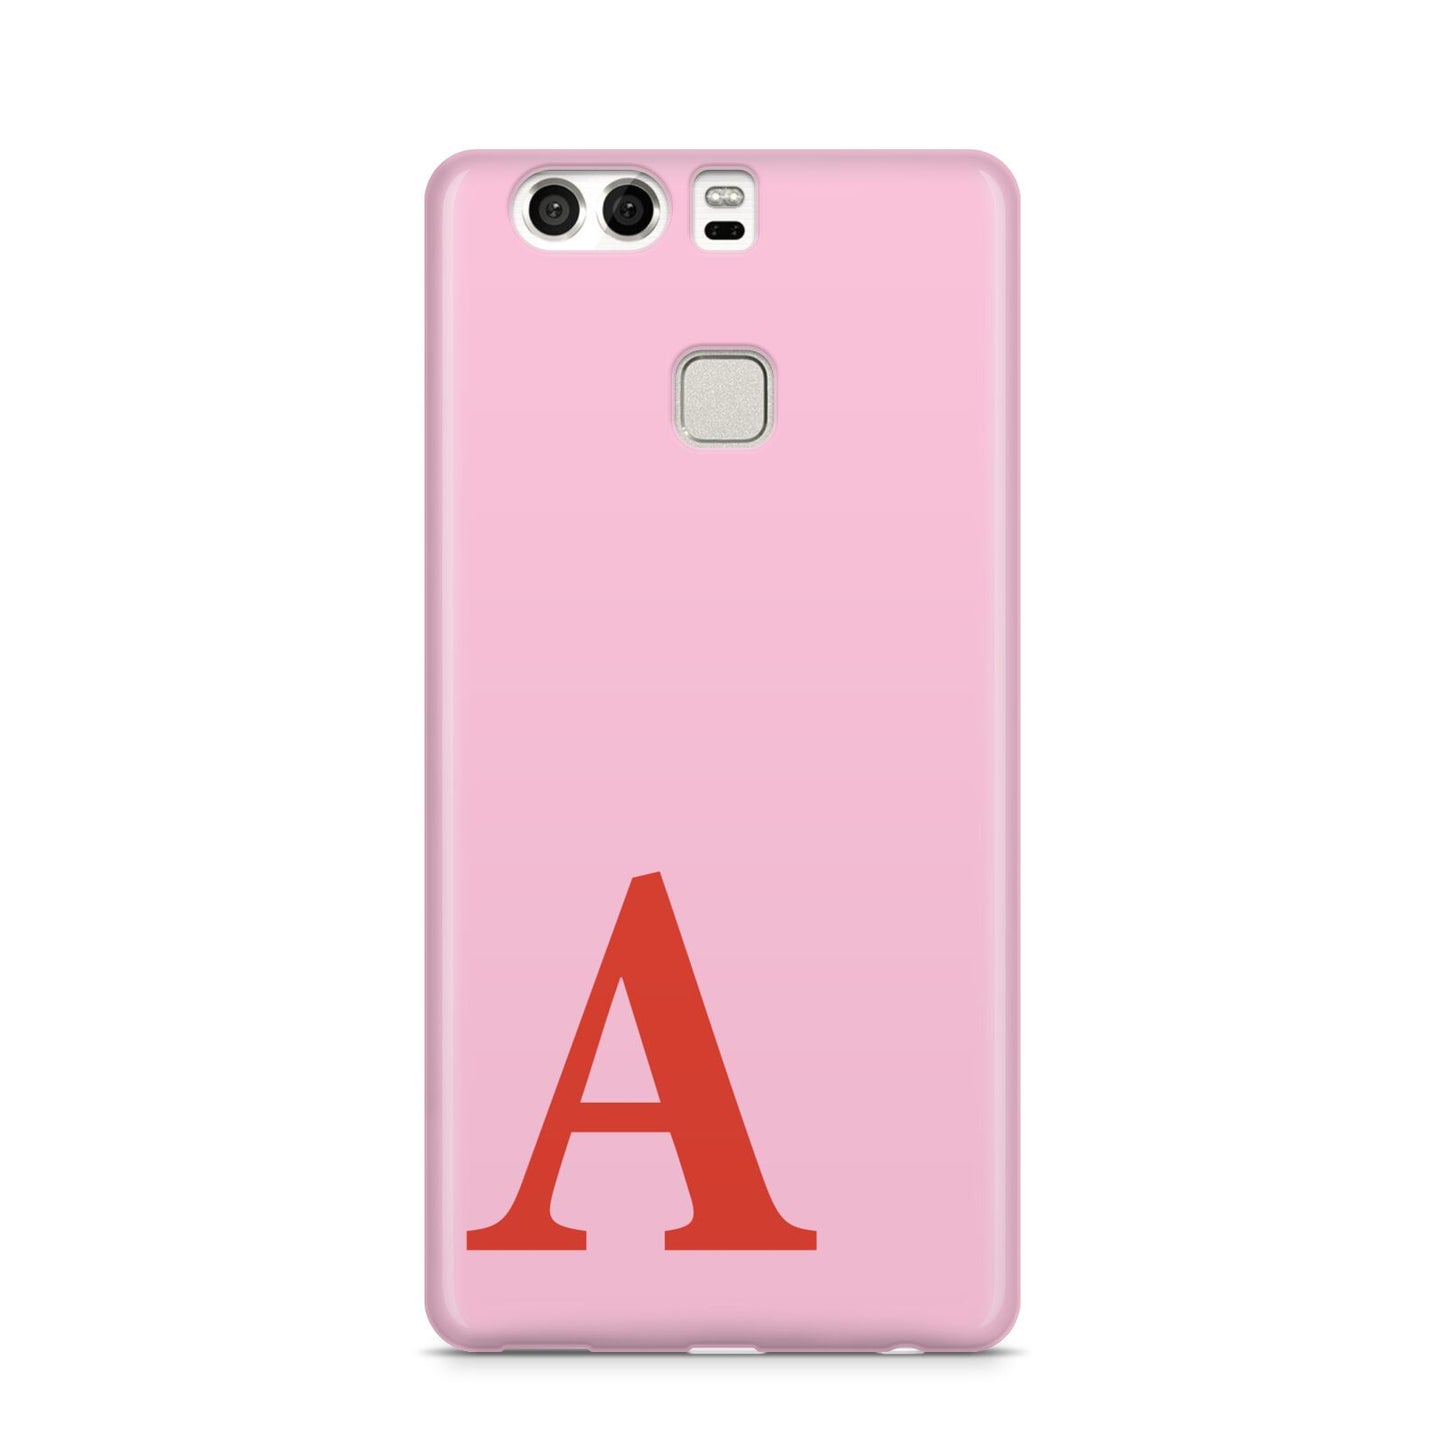 Personalised Pink and Red Huawei P9 Case